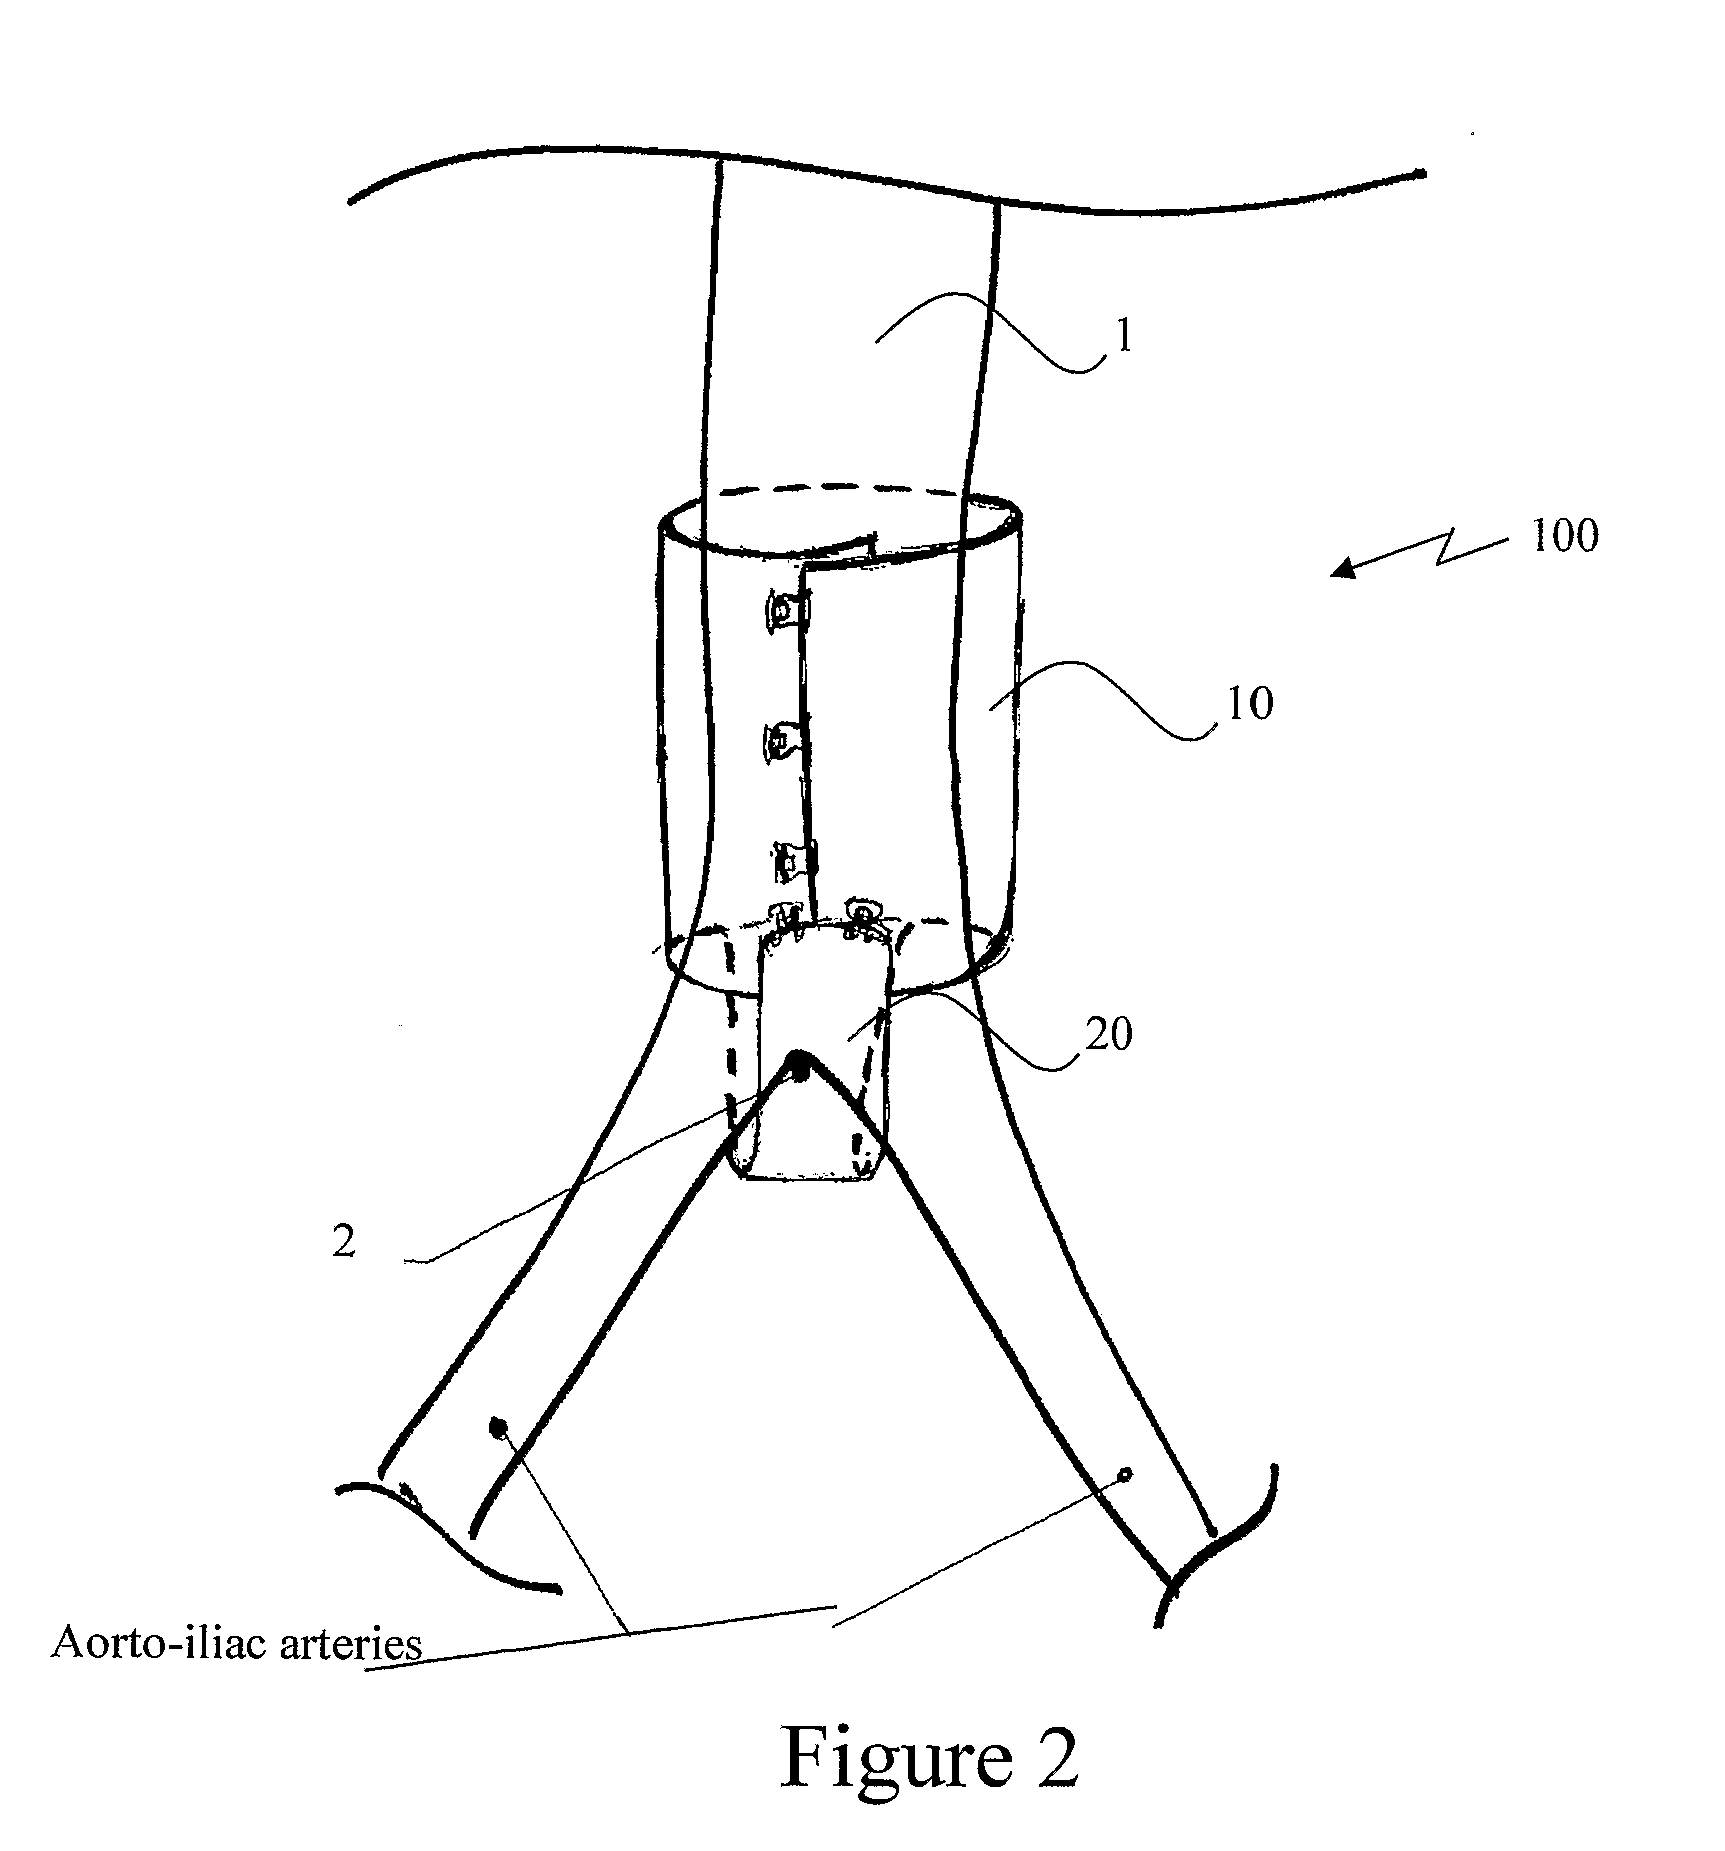 Extra-vascular wrapping for treating aneurysmatic aorta and methods thereof